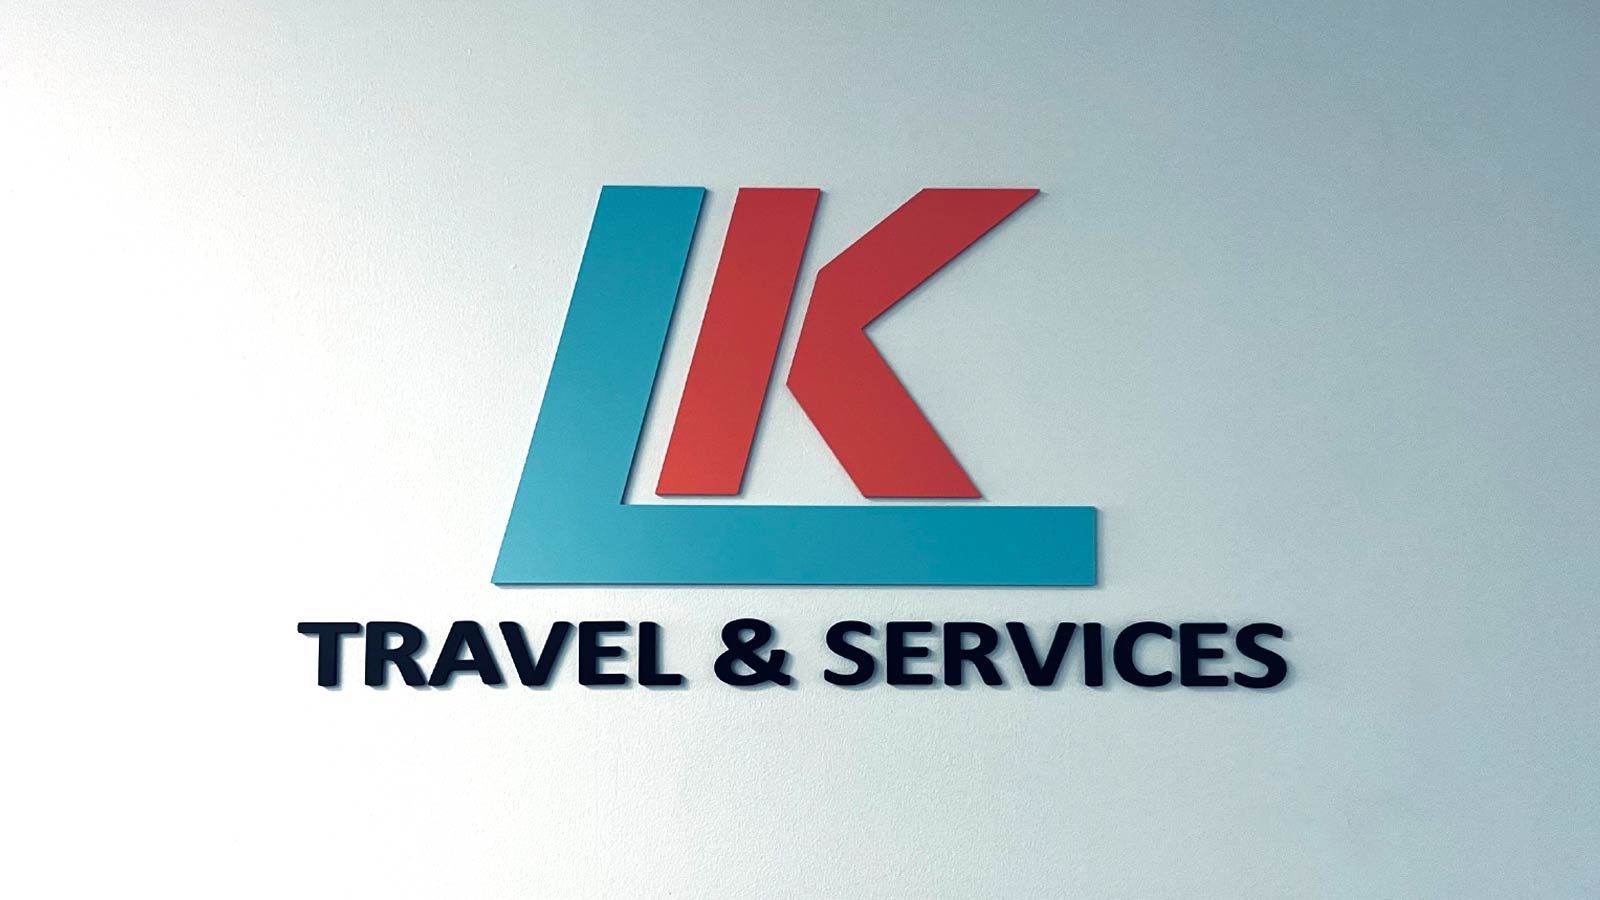 Travel & Services office sign